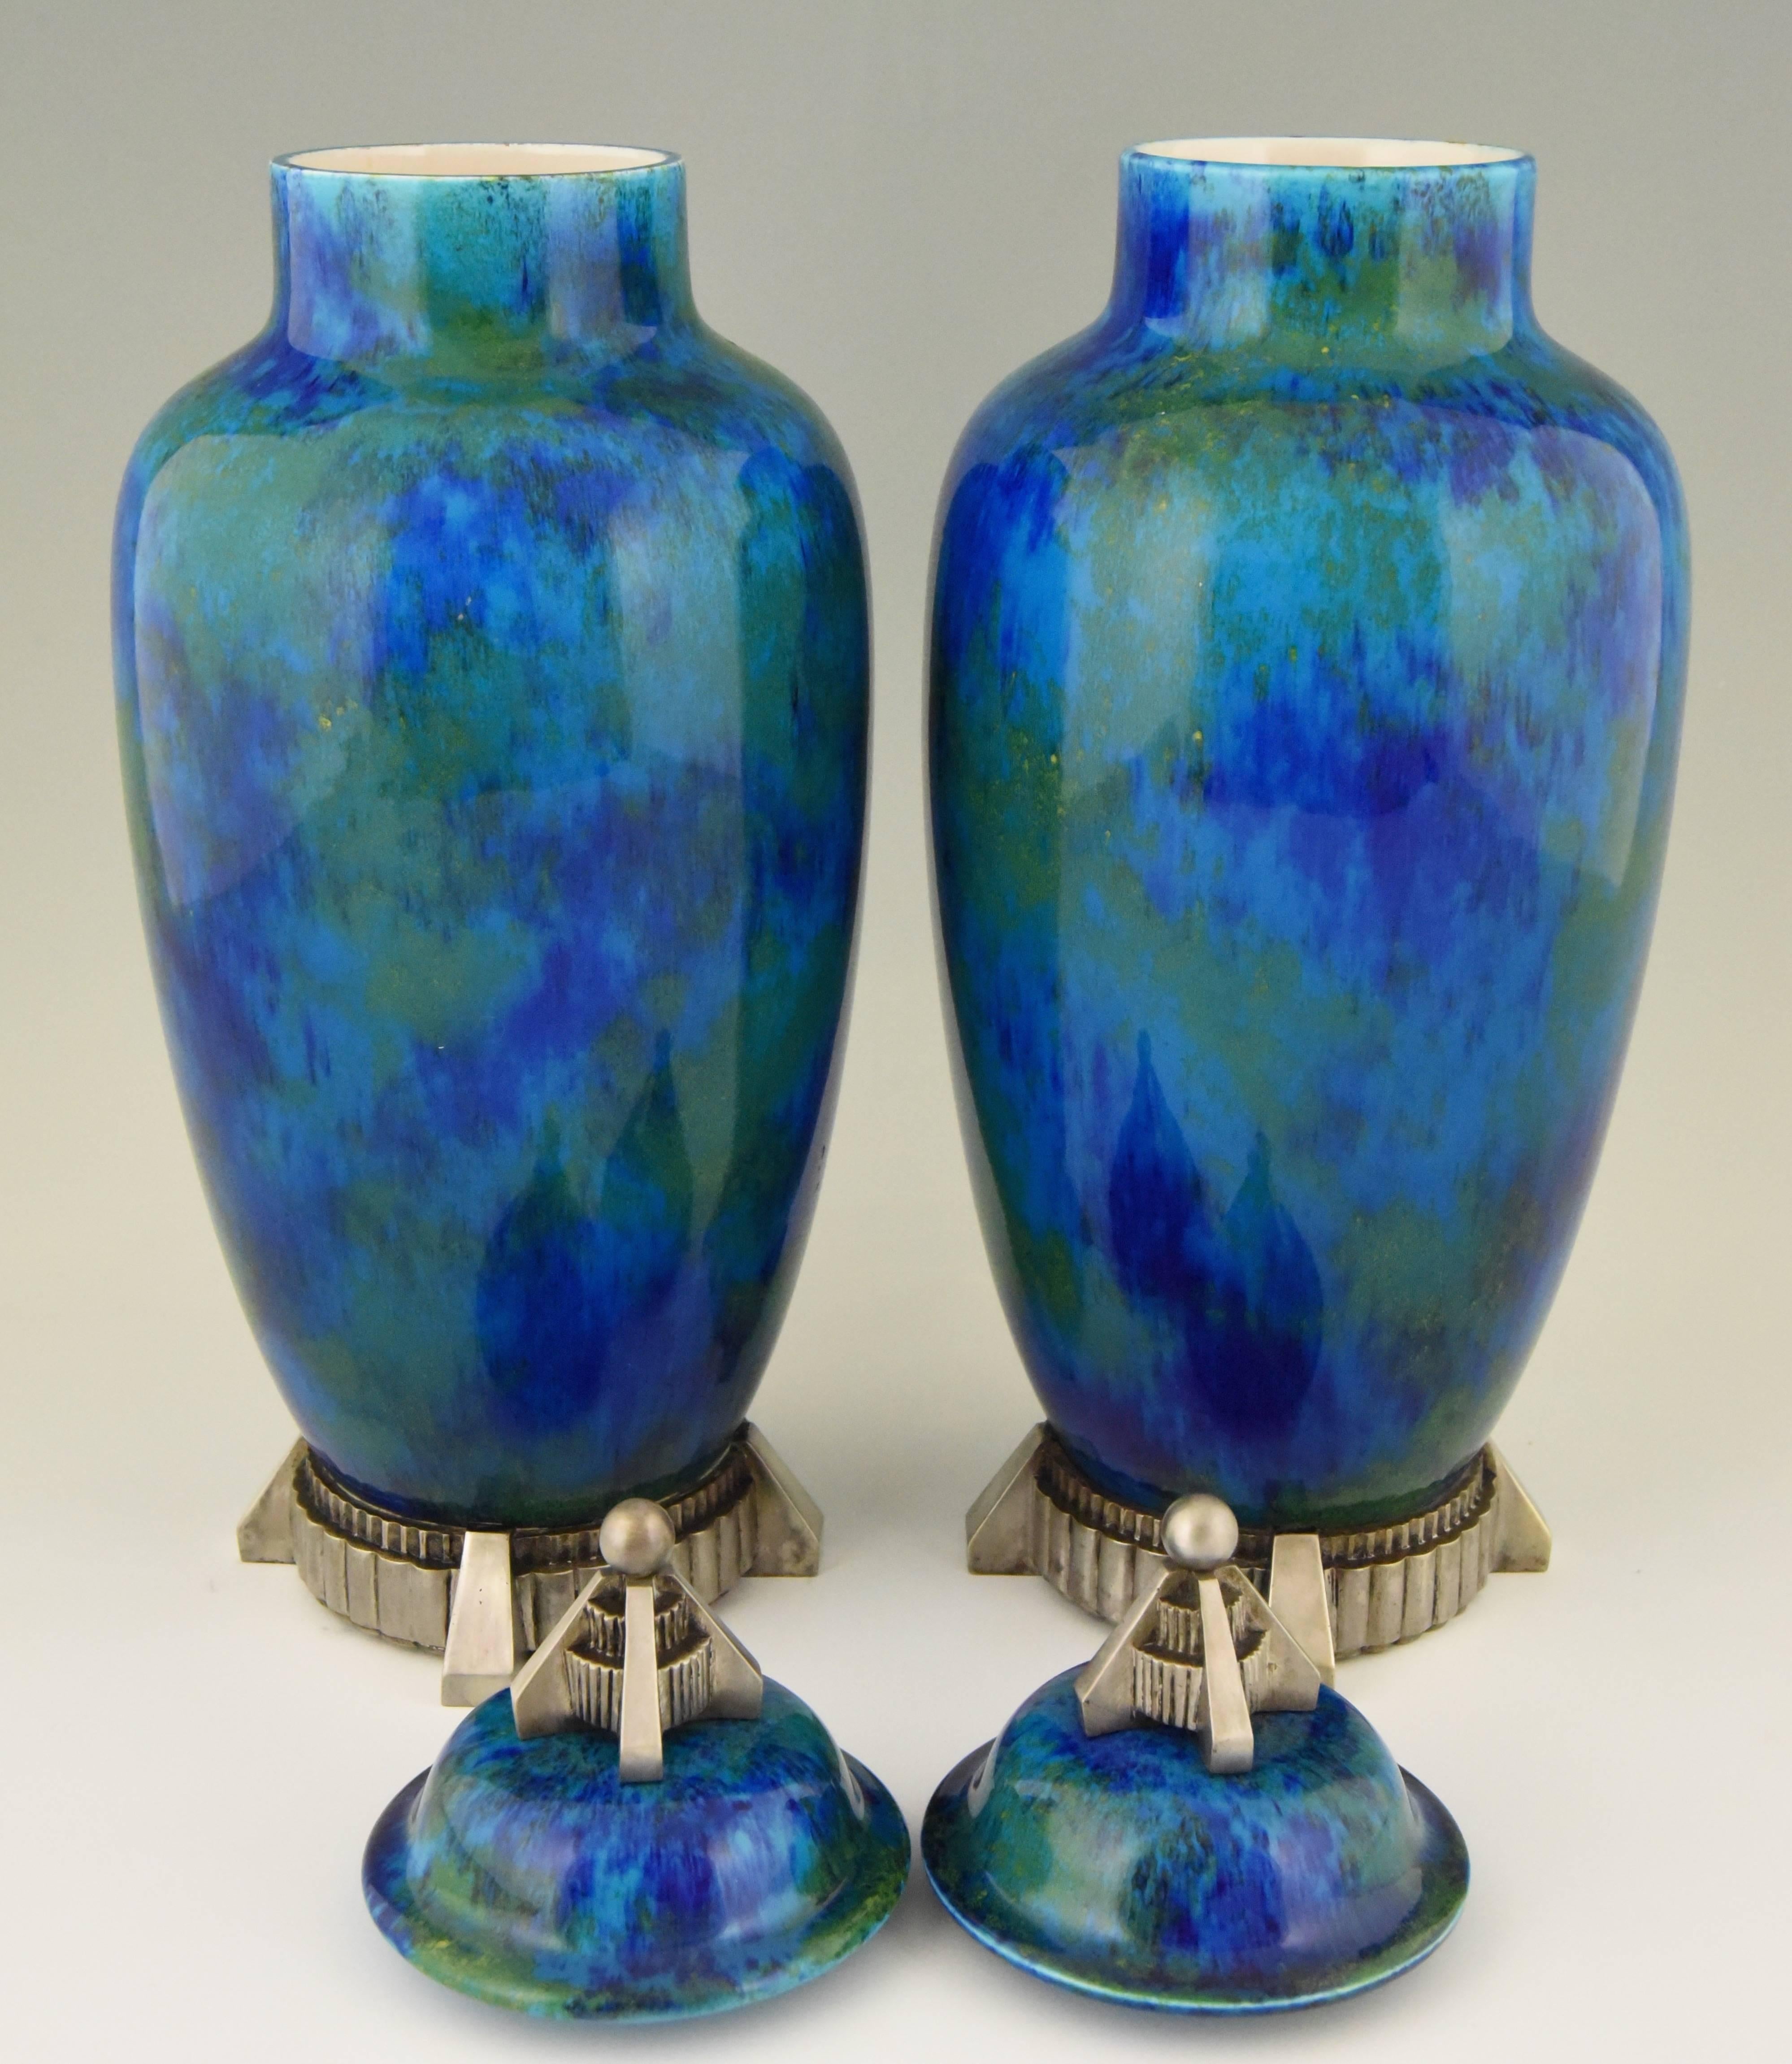 French Art Deco Pair of Ceramic Vases-Urns with Blue Glaze  Paul Milet for Sèvres, 1925